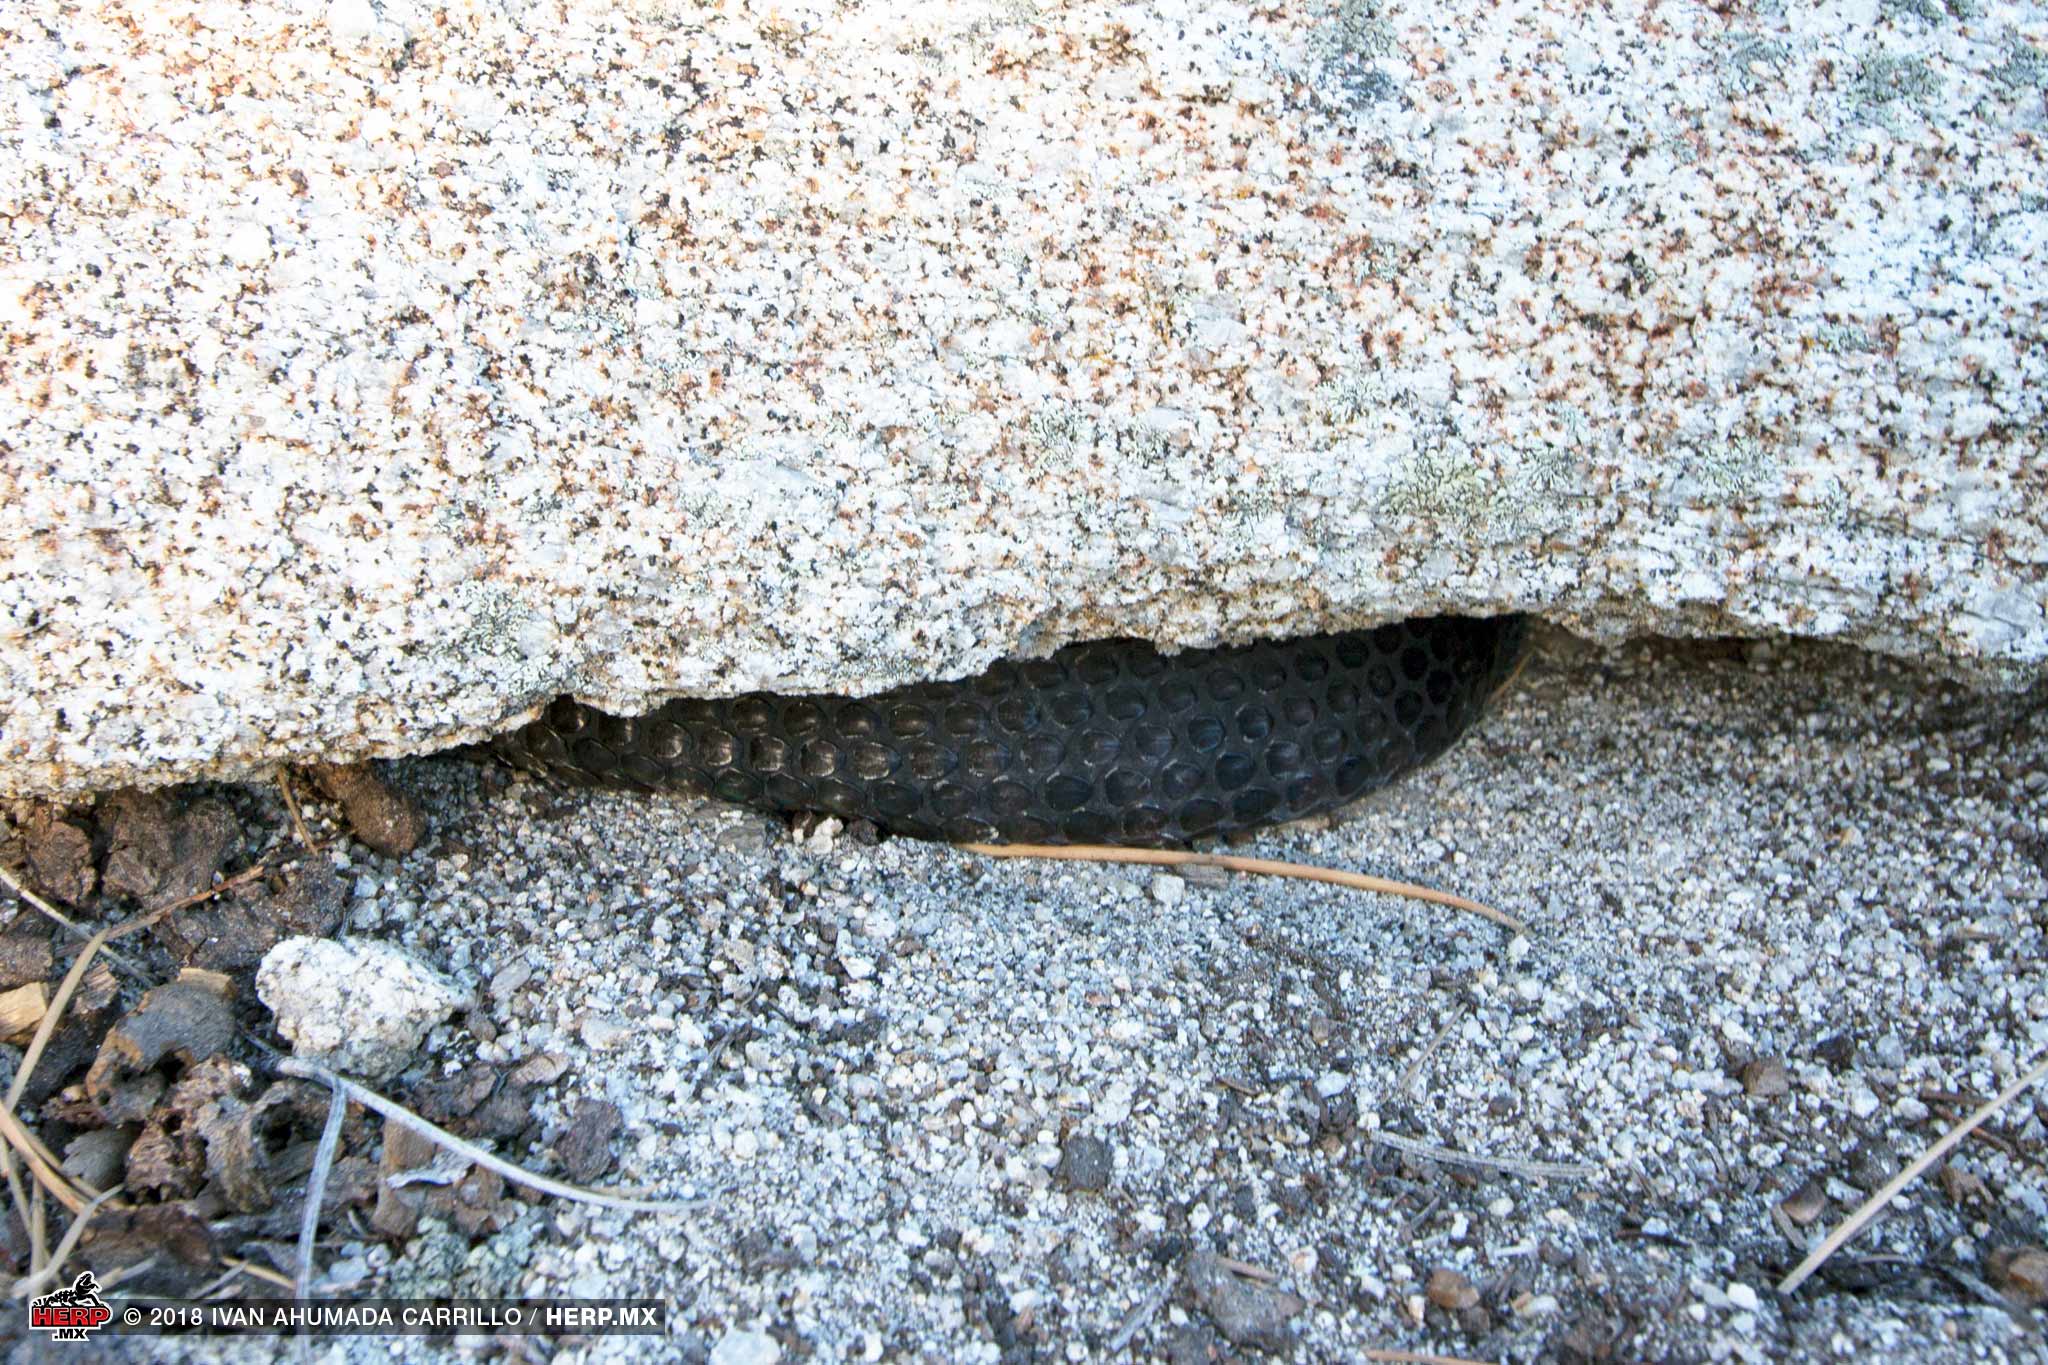 A Southern Pacific Rattlesnake (<em>Crotalus helleri</em>) hangs a coil out of a rocky crevice <br />© Ivan Ahumada Carrillo / HERP.MX